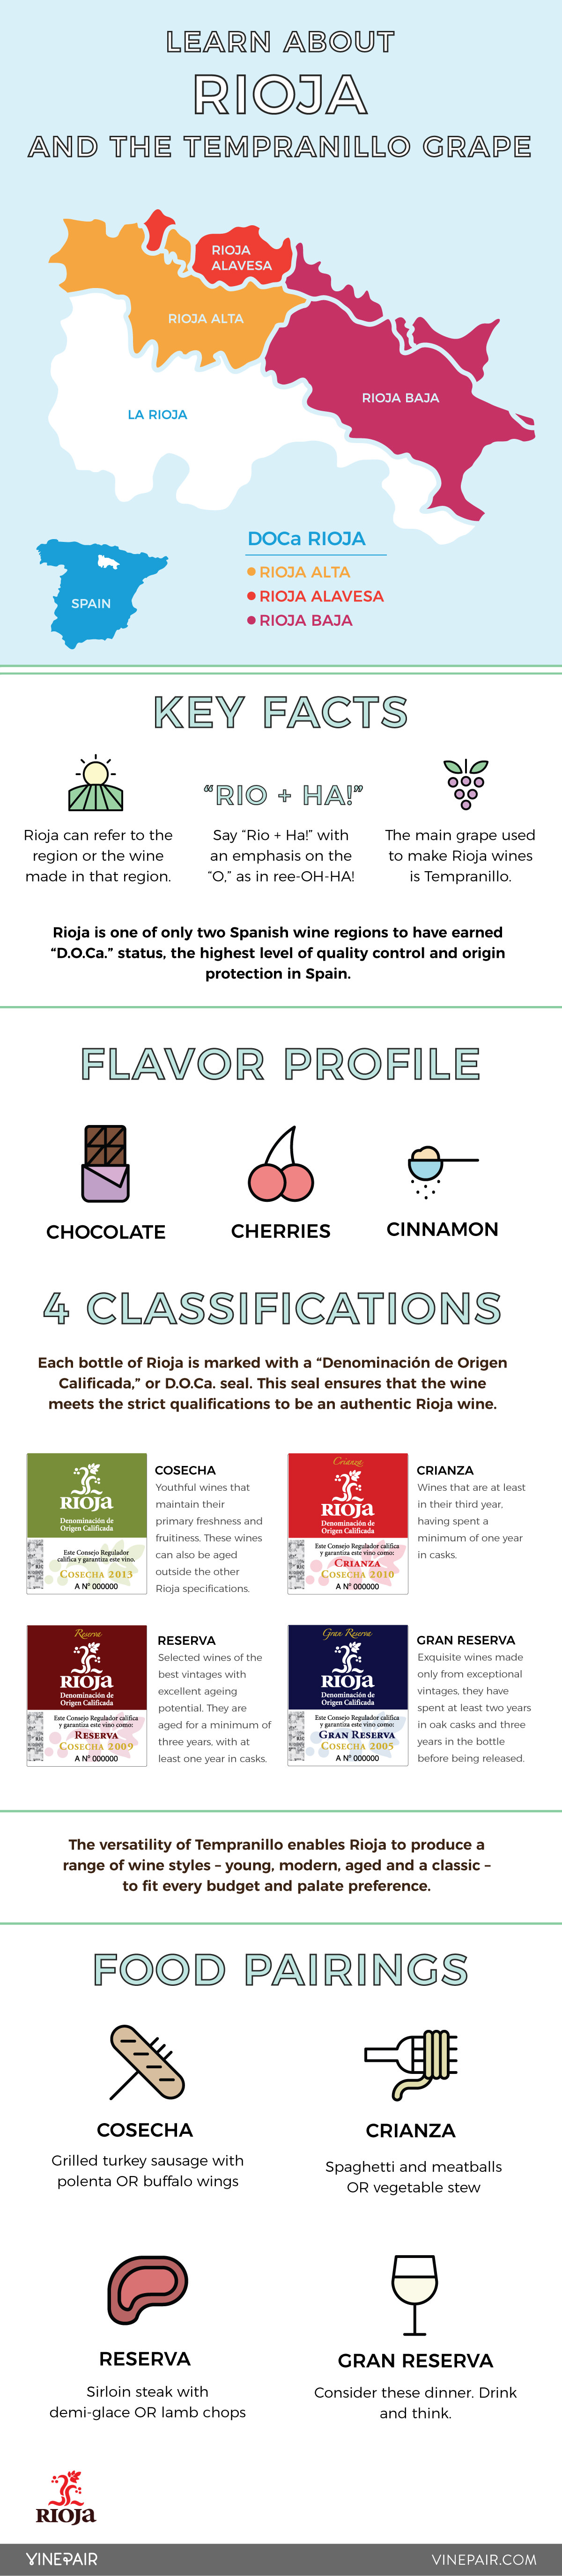 The Complete Guide To Rioja And The Tempranillo Grape - Infographic